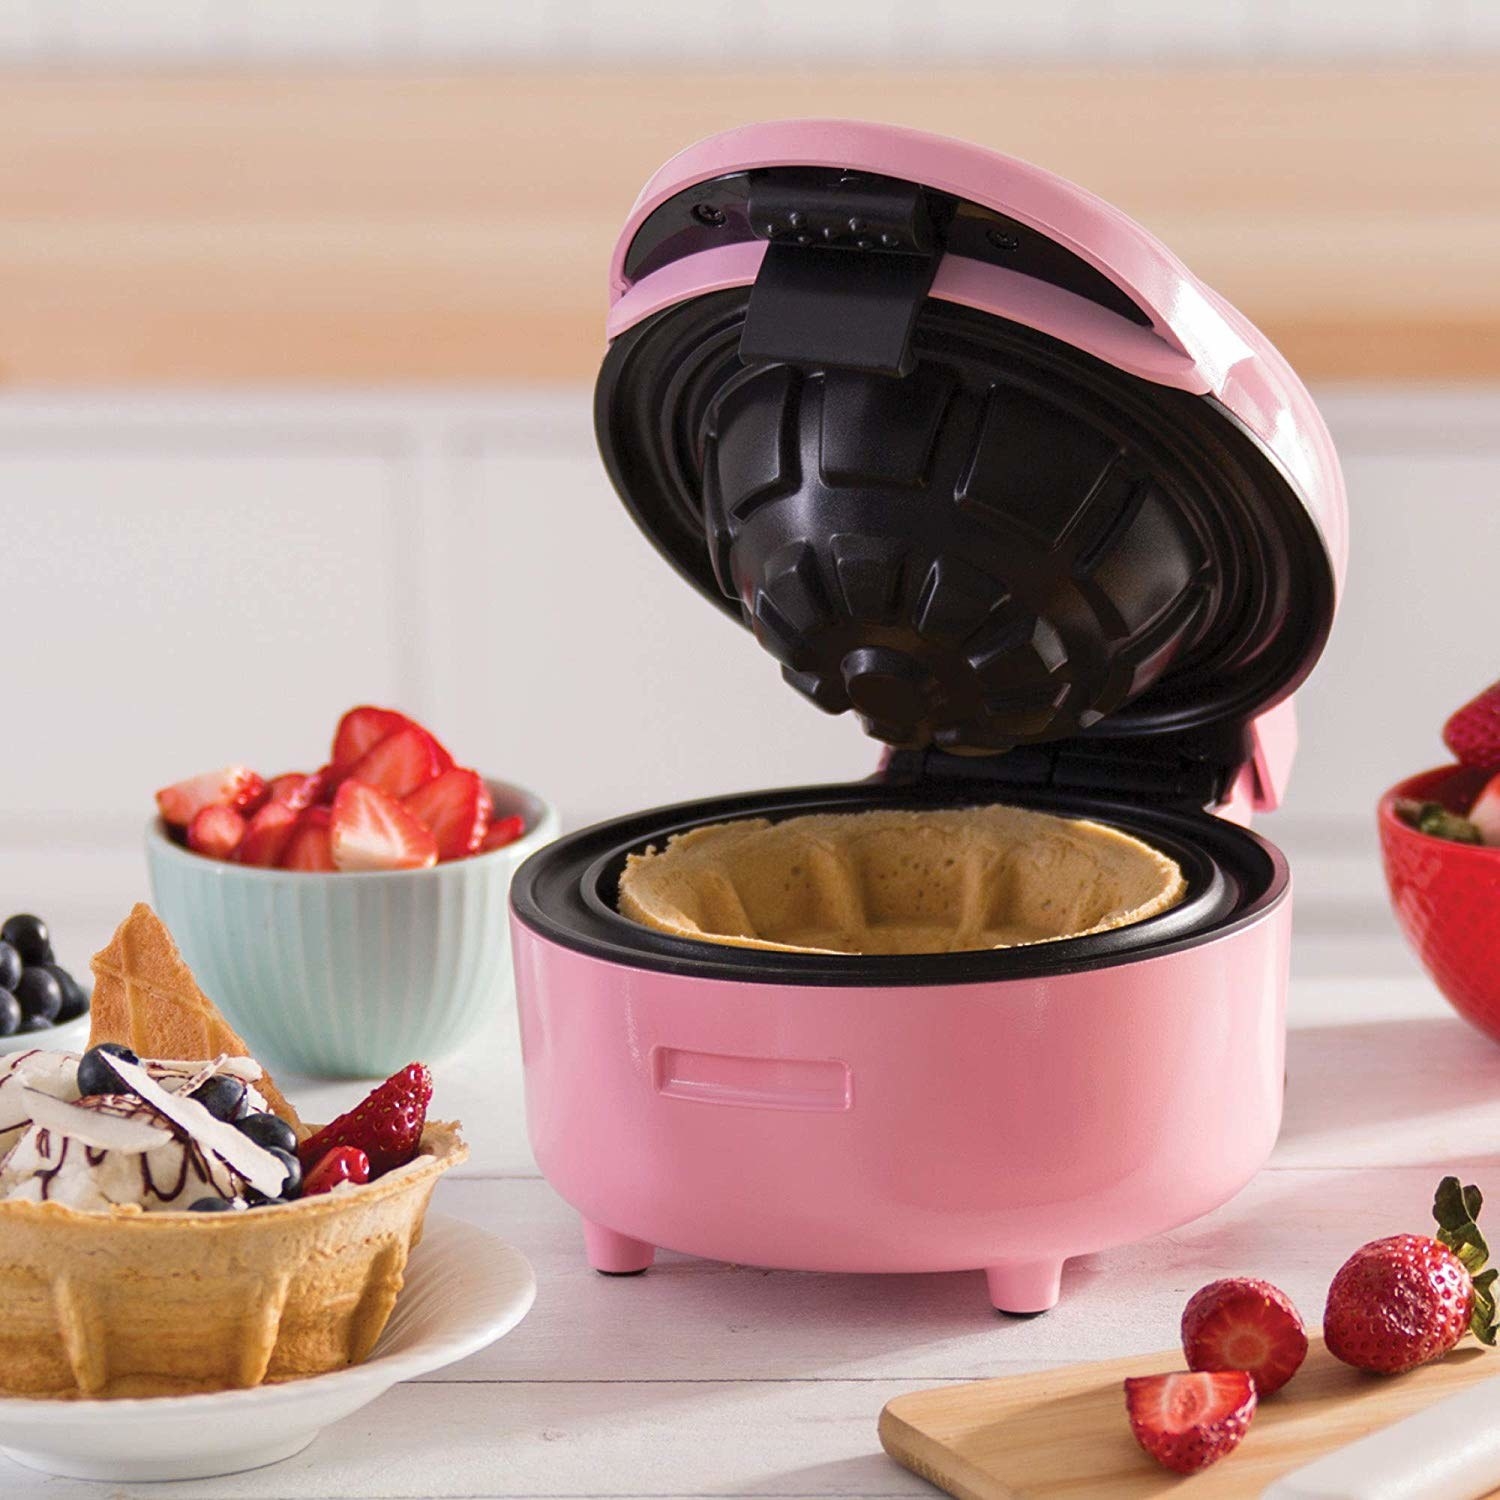 The waffle bowl maker making a waffle bowl, with a made one filled with ice cream, fruit, and more sitting nearby